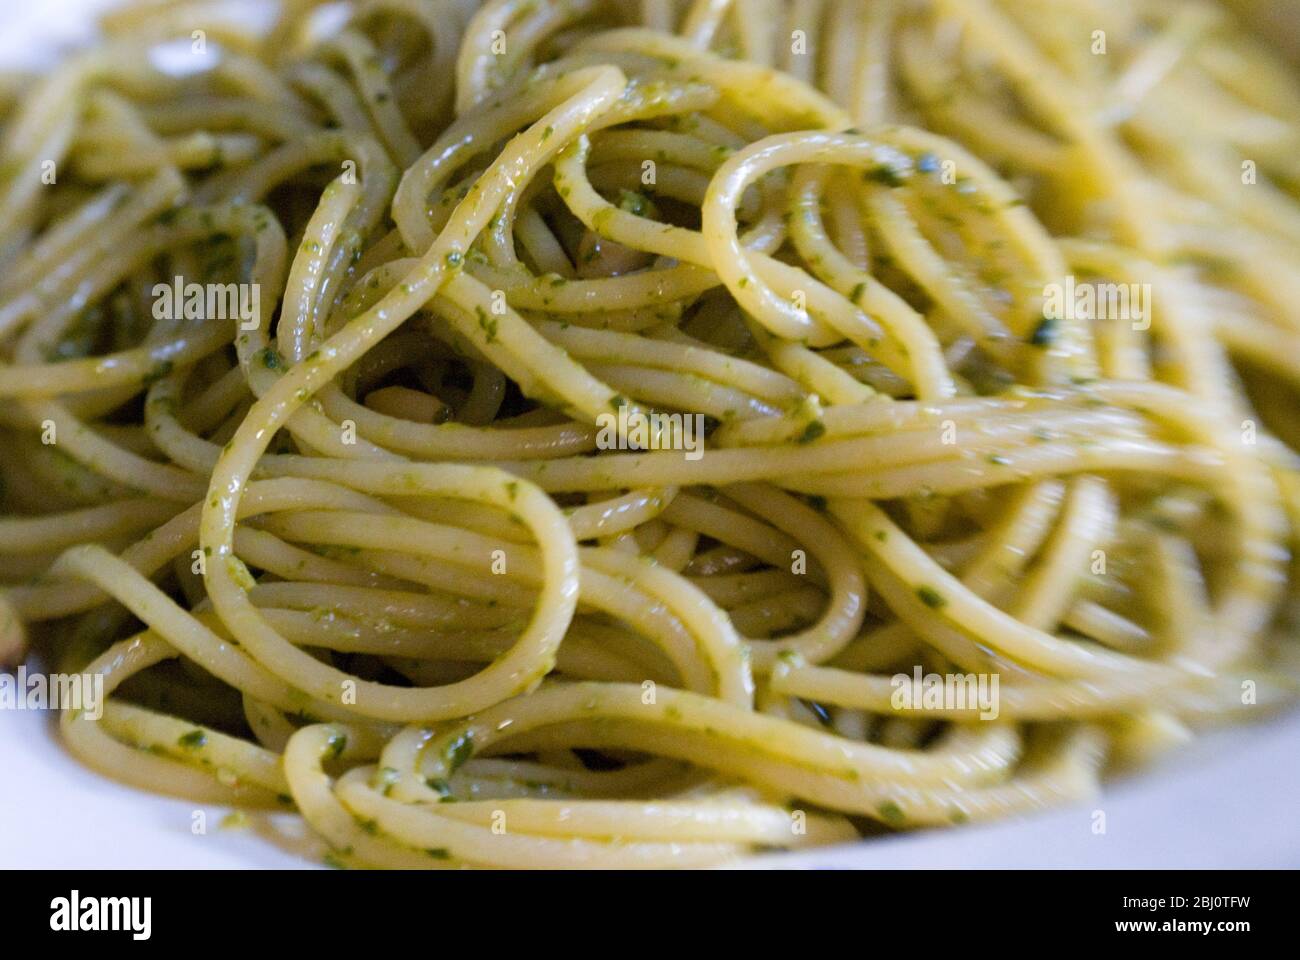 Plate of spaghetti with 'pesto' made of coriander and chill with pine nuts. Shot with Lensbaby lens for blurred effect. - Stock Photo